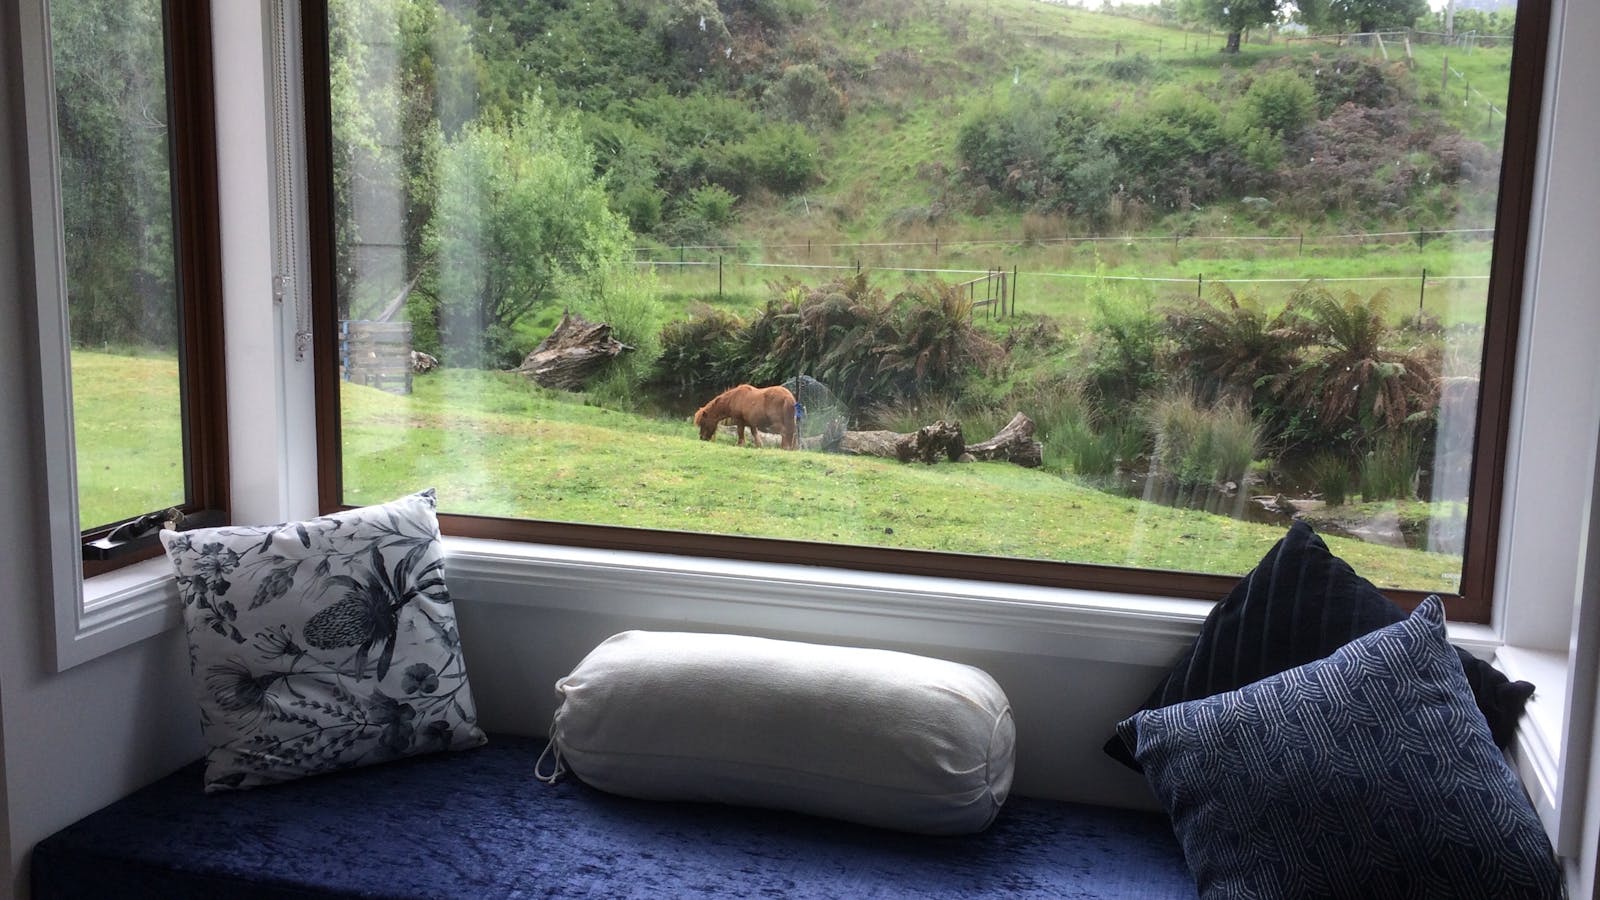 Perfect window seat takes in our friendly animals and our resident platypus at play